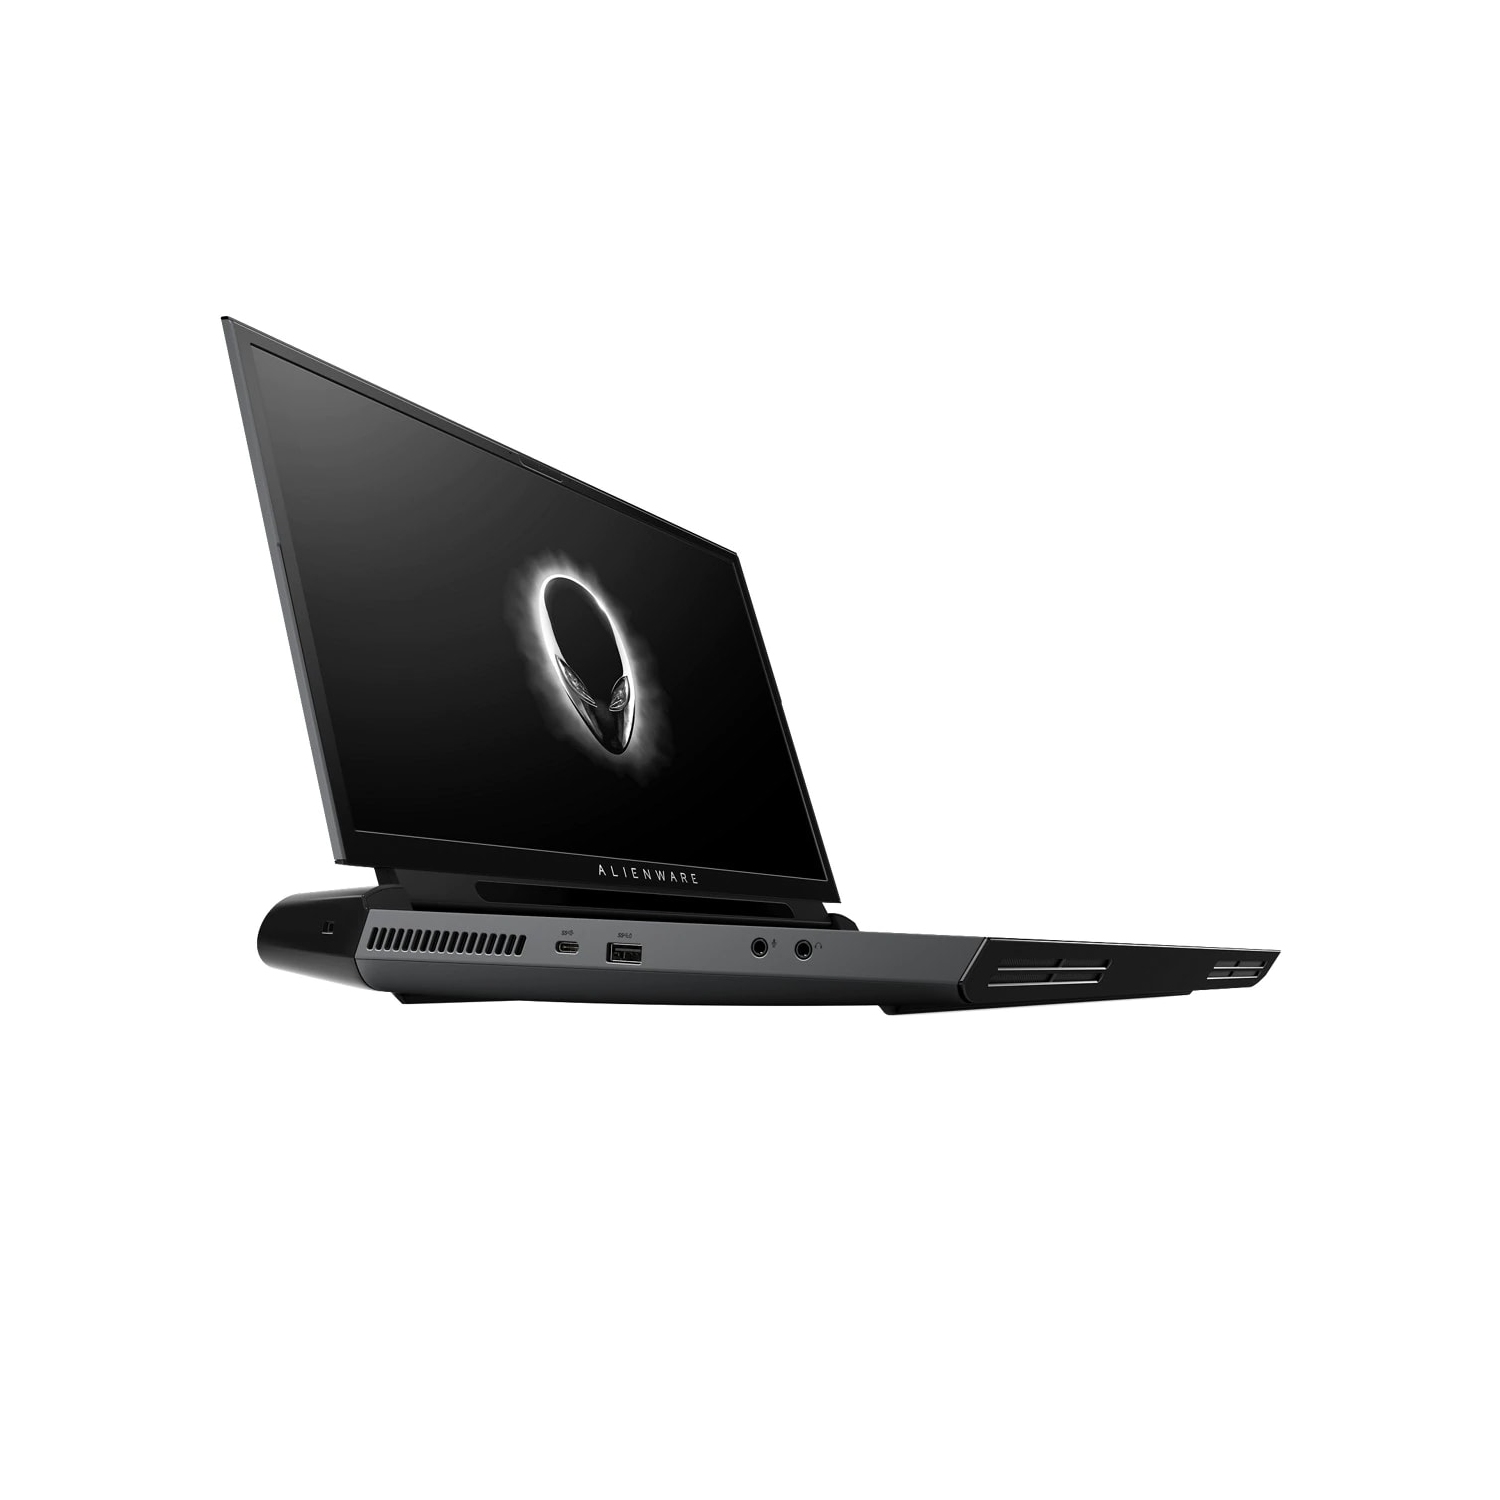 Refurbished (Excellent) - Dell Alienware 17 51m Gaming Laptop (2020), 17.3" FHD, Core i7, 1TB SSHD + 512GB SSD, 16GB RAM, RTX 2070, 8 Cores @ 4.7 GHz Certified